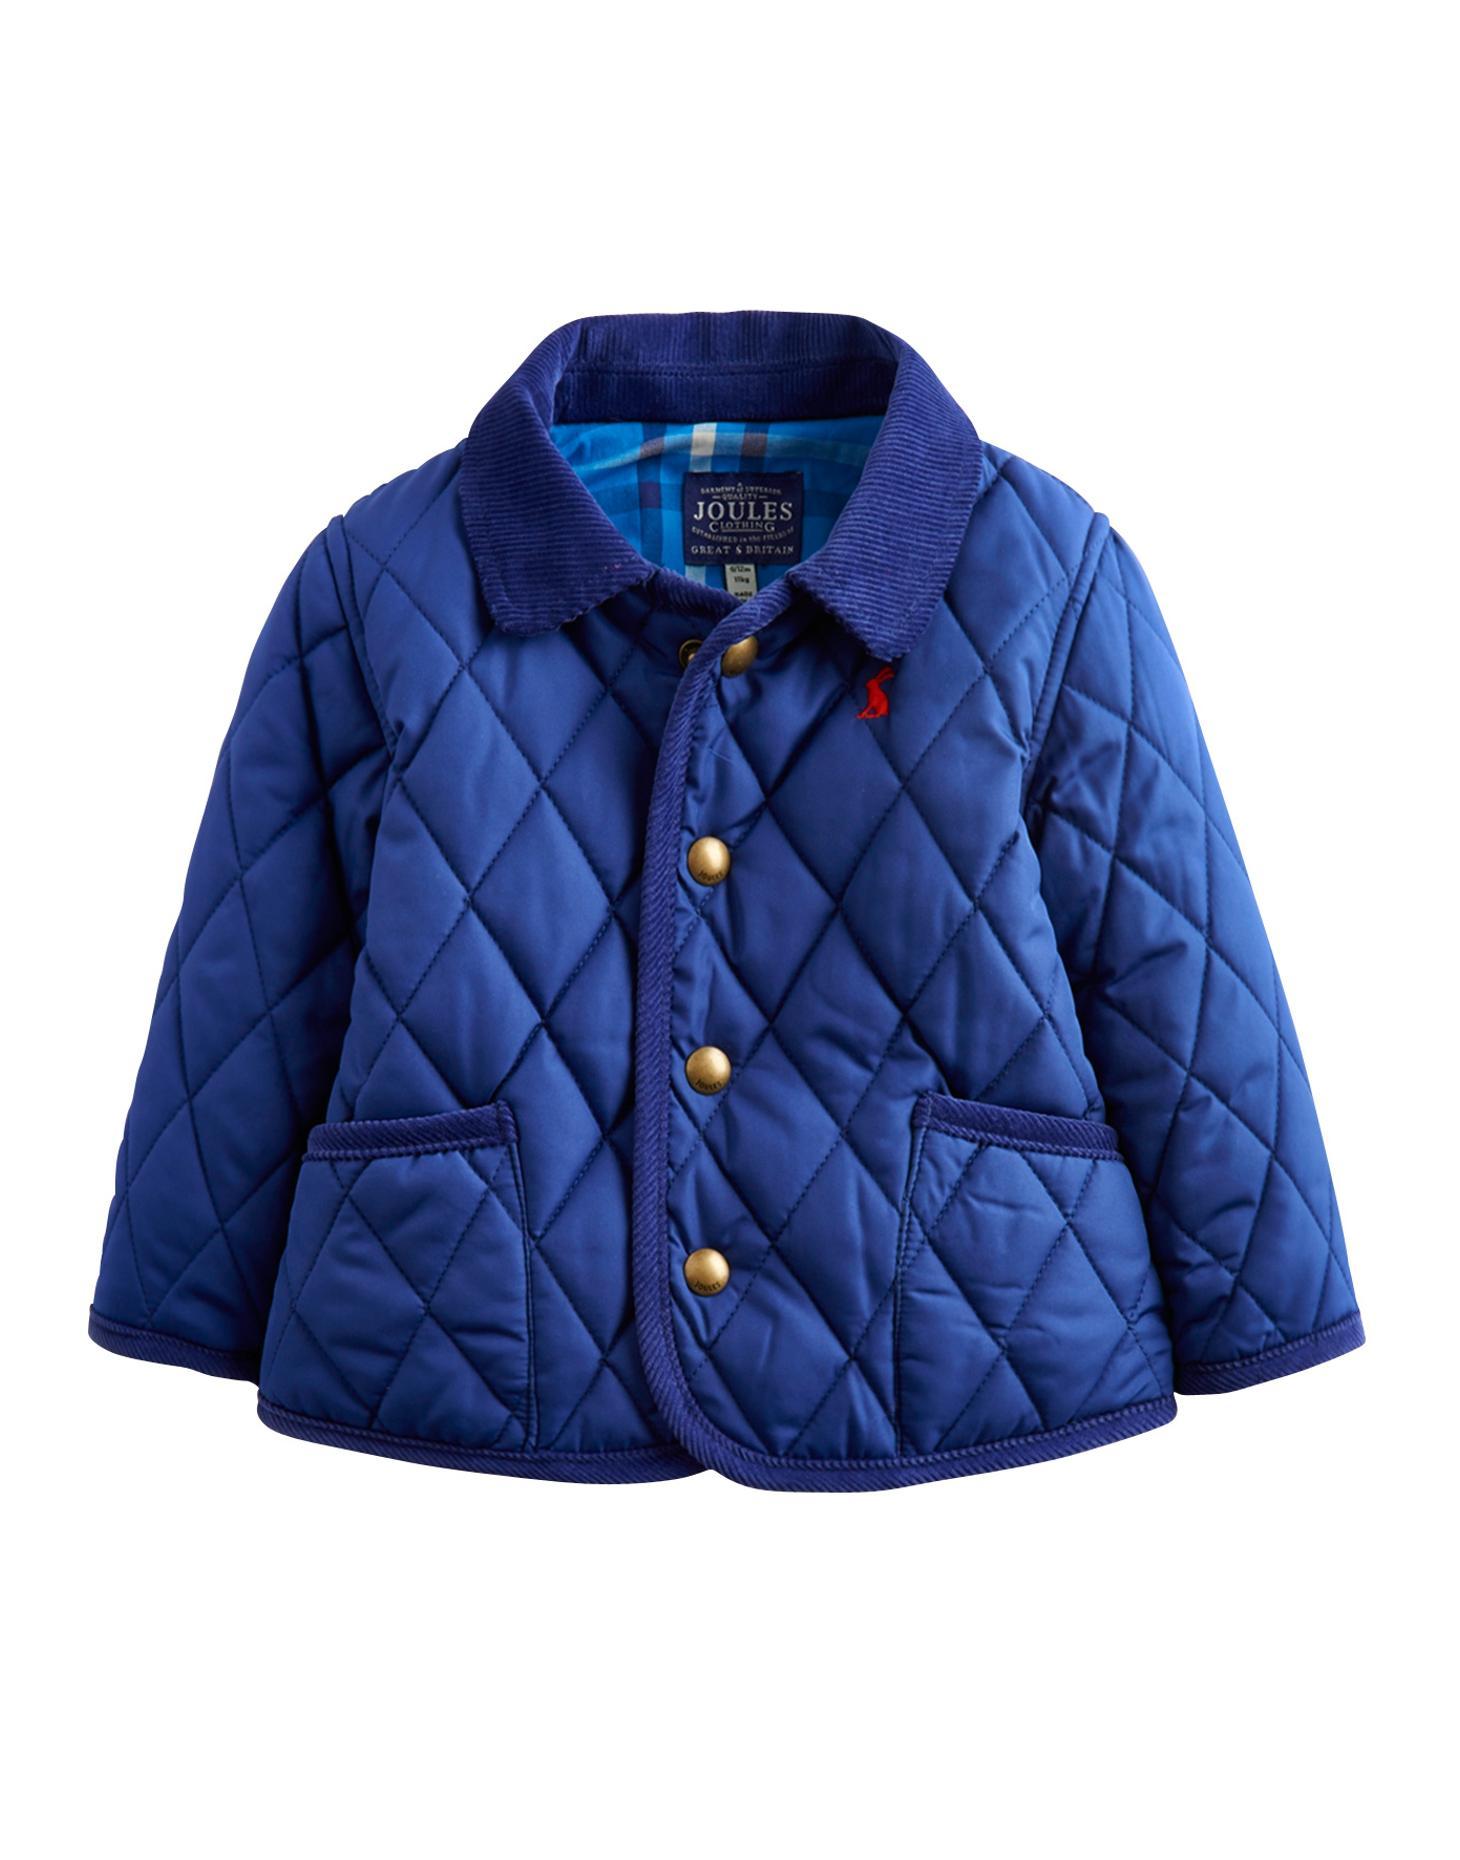 Joules MILFORD QUILTED JACKET